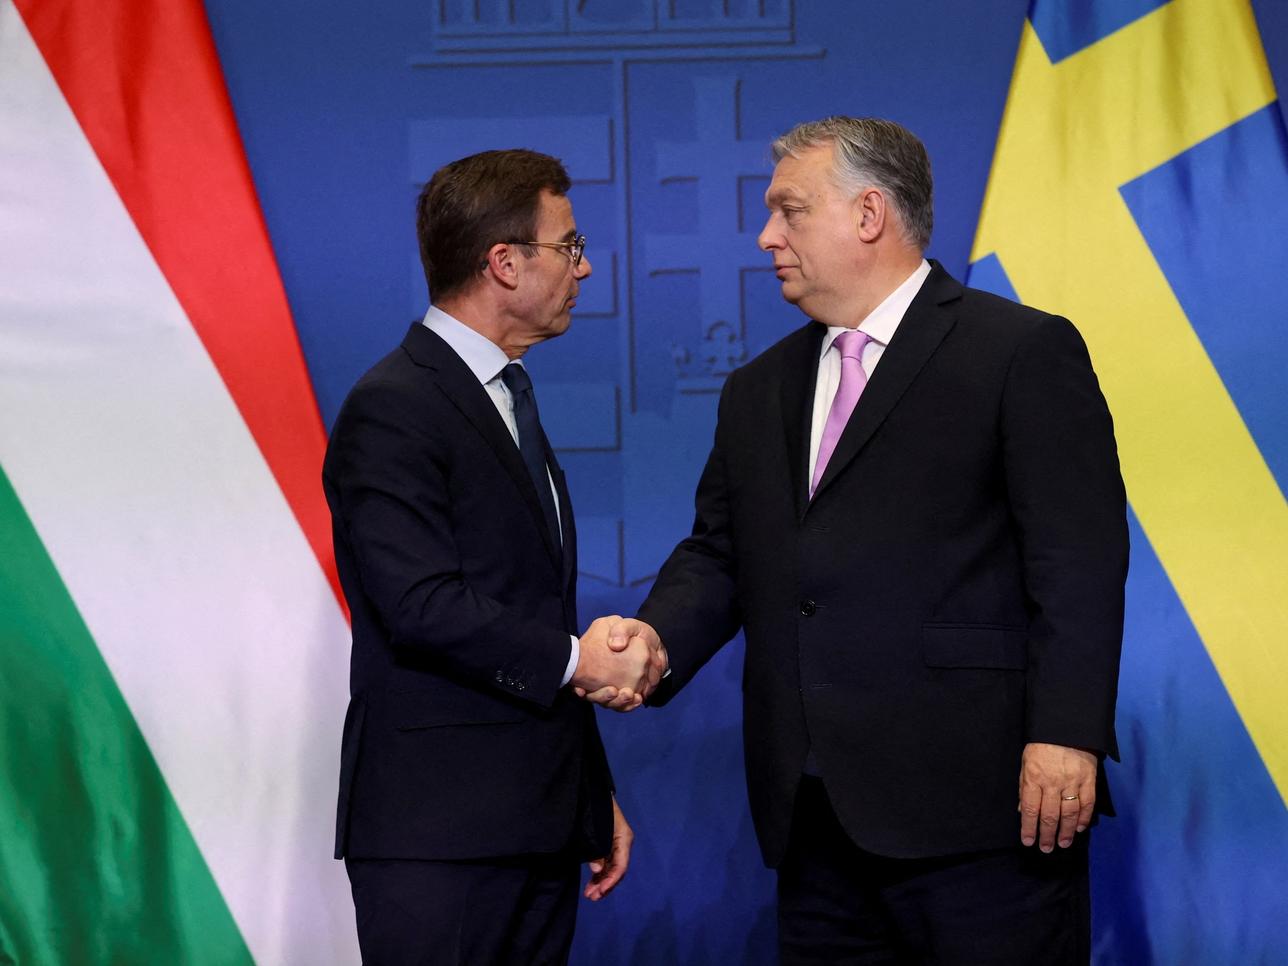 Swedish Prime Minister Ulf Kristersson and Hungarian Prime Minister Viktor Orban shake hands at a joint press conference in Budapest, Hungary, February 23, 2024. REUTERS/Bernadett Szabo